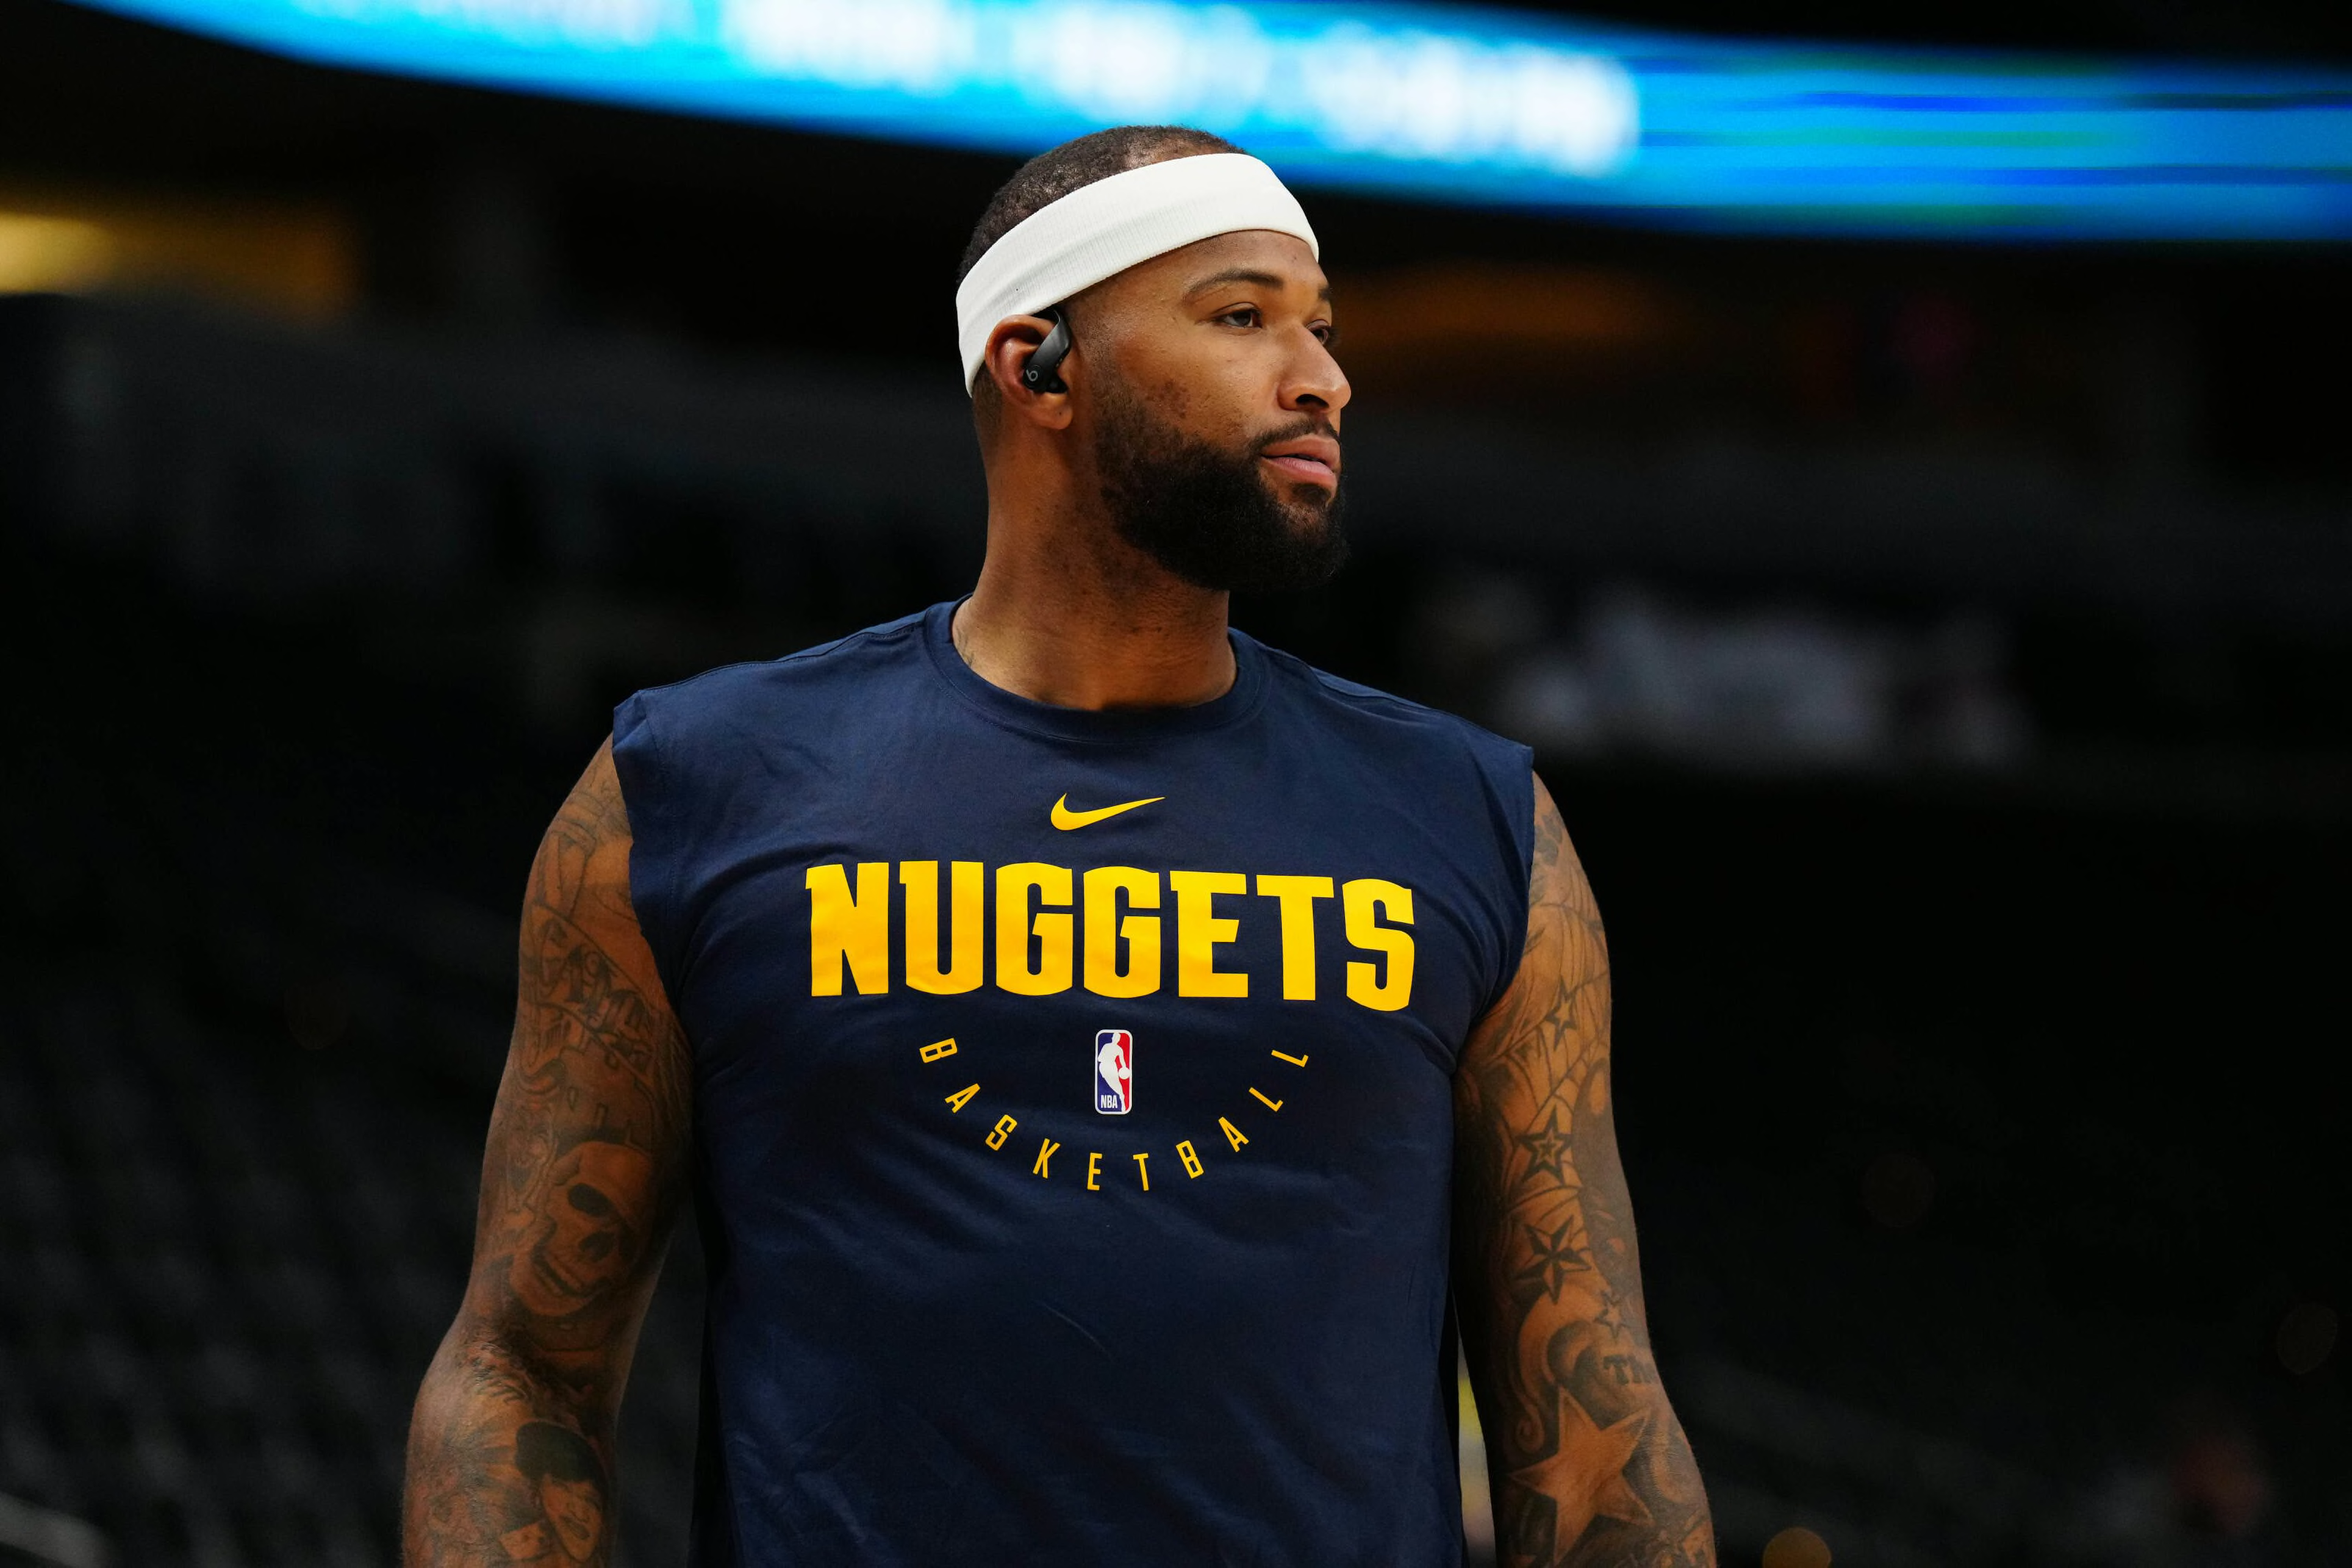 Denver Nuggets center DeMarcus Cousins warms up before the game against the Memphis Grizzlies at Ball Arena on 21 Jan. 2022. (Ron Chenoy-USA TODAY Sports)